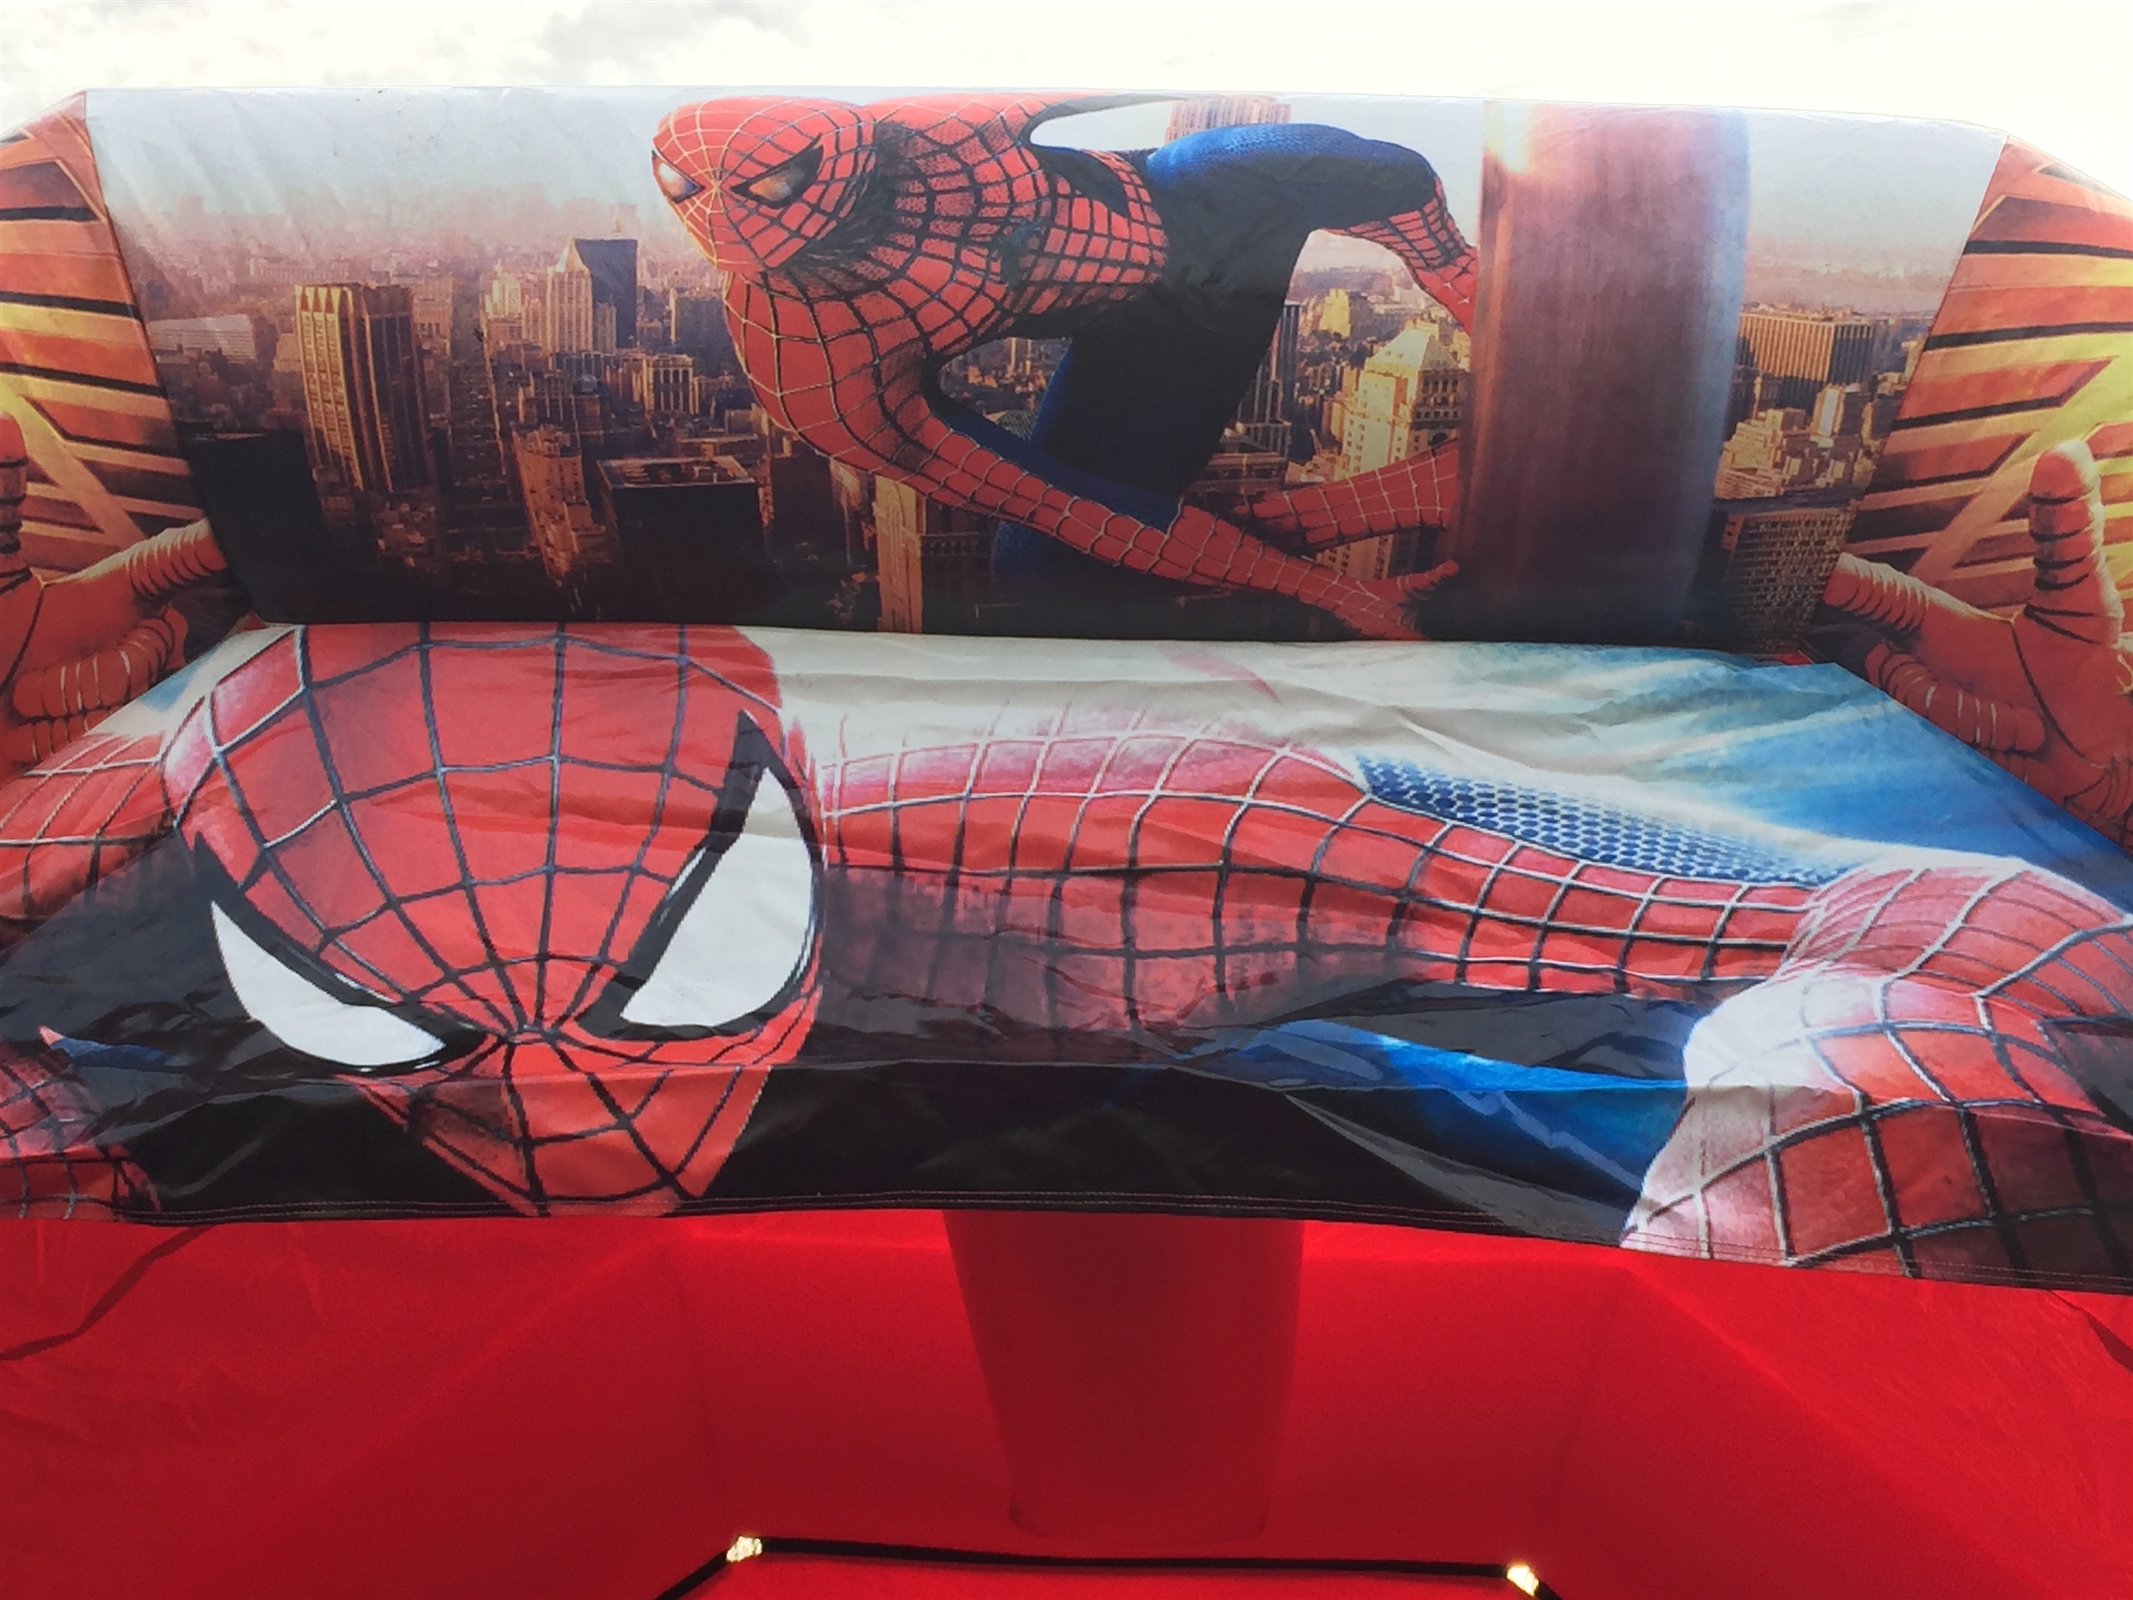 Spider-Man Bouncy Castle 12ft x 15ft - Bouncy Castle Hire in Liverpool,  Widnes , Wirral, St Helens & Merseyside